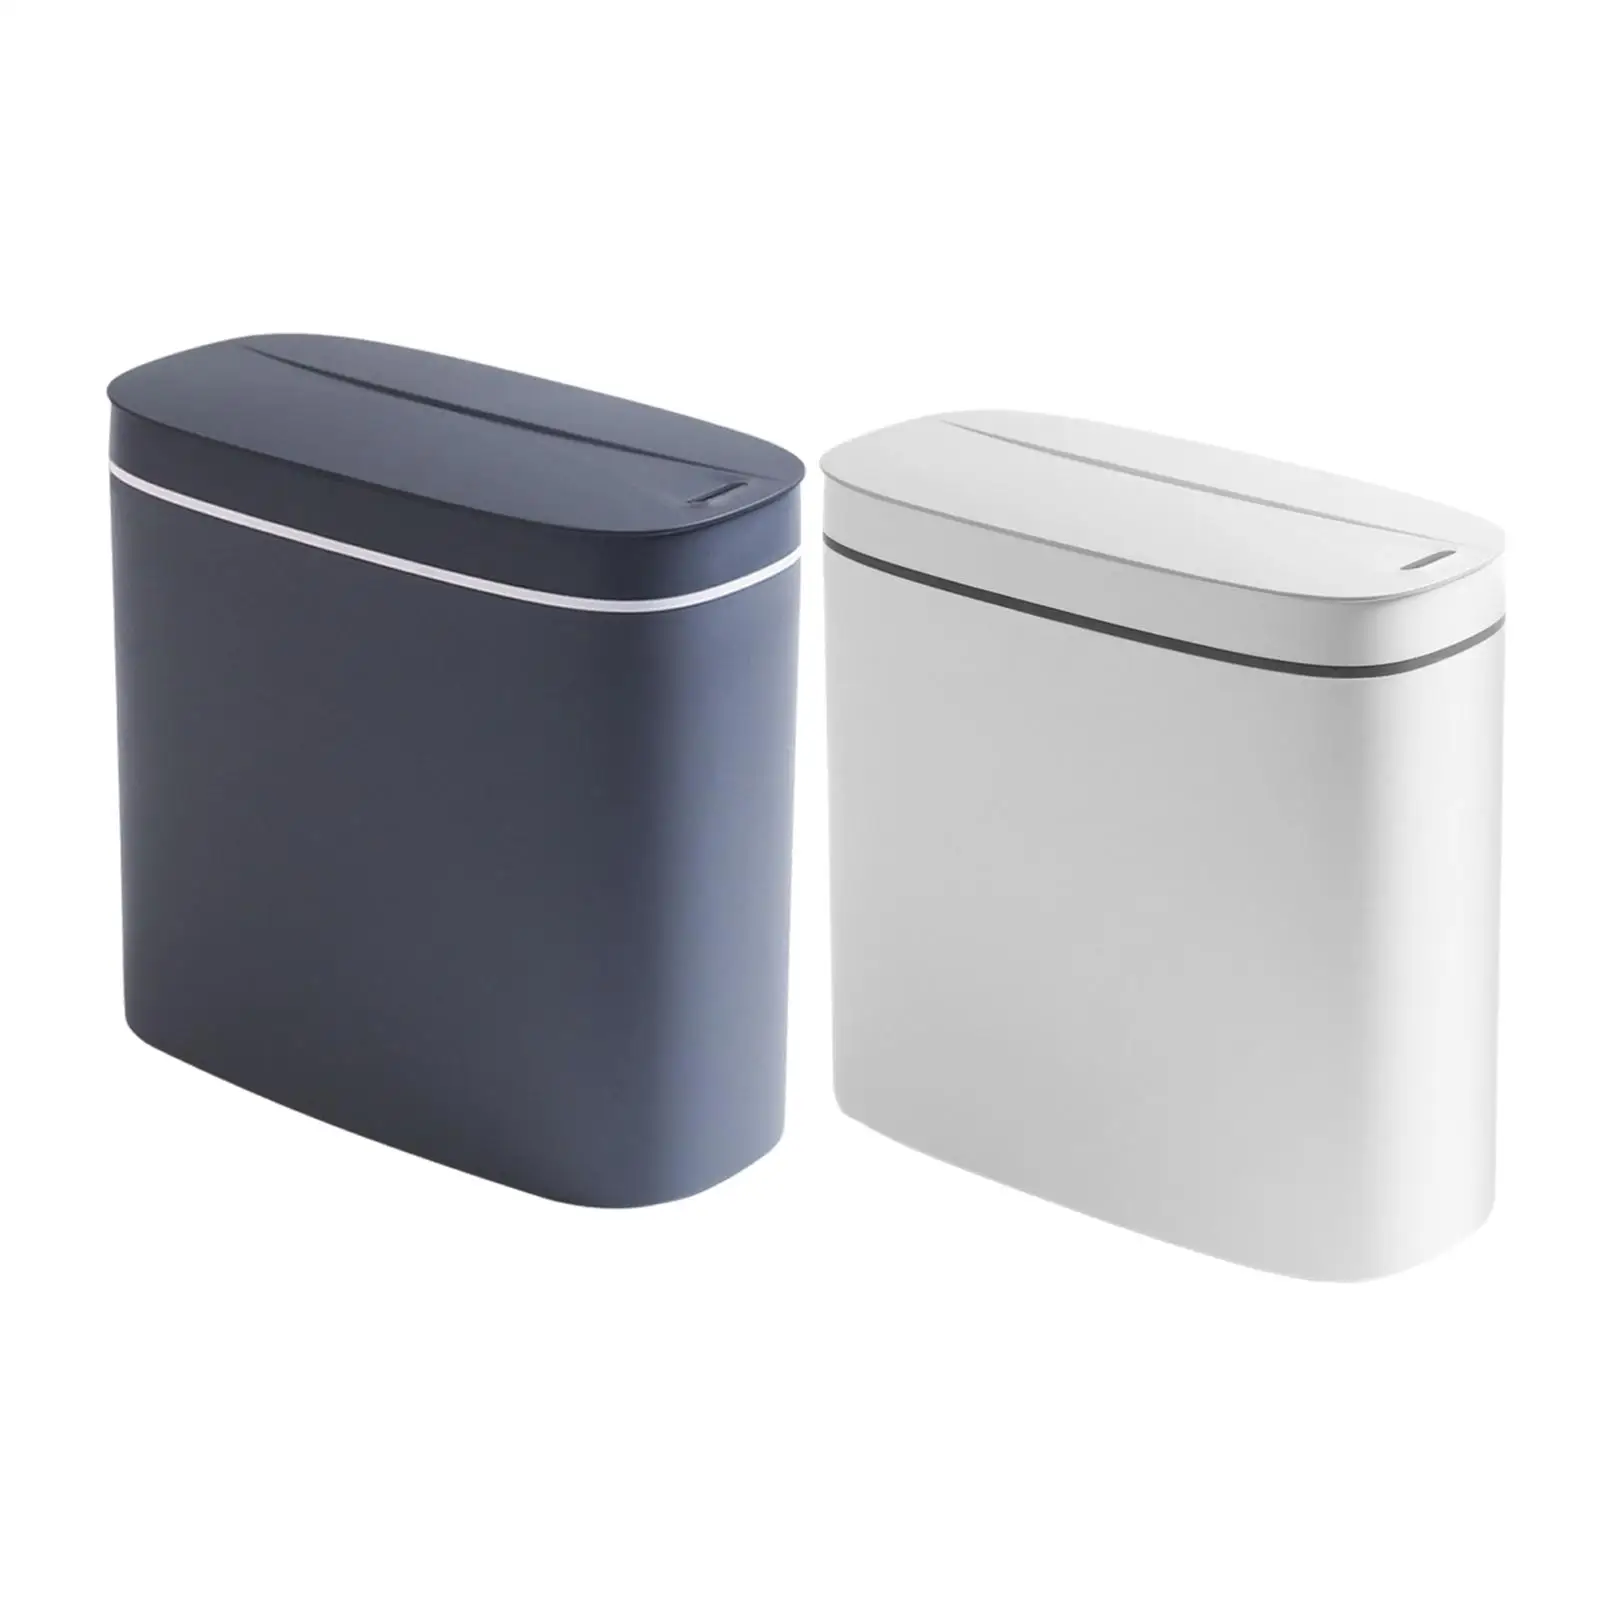  Touchless Motion Sensor Trash Can Waste  13L Waterproof for 